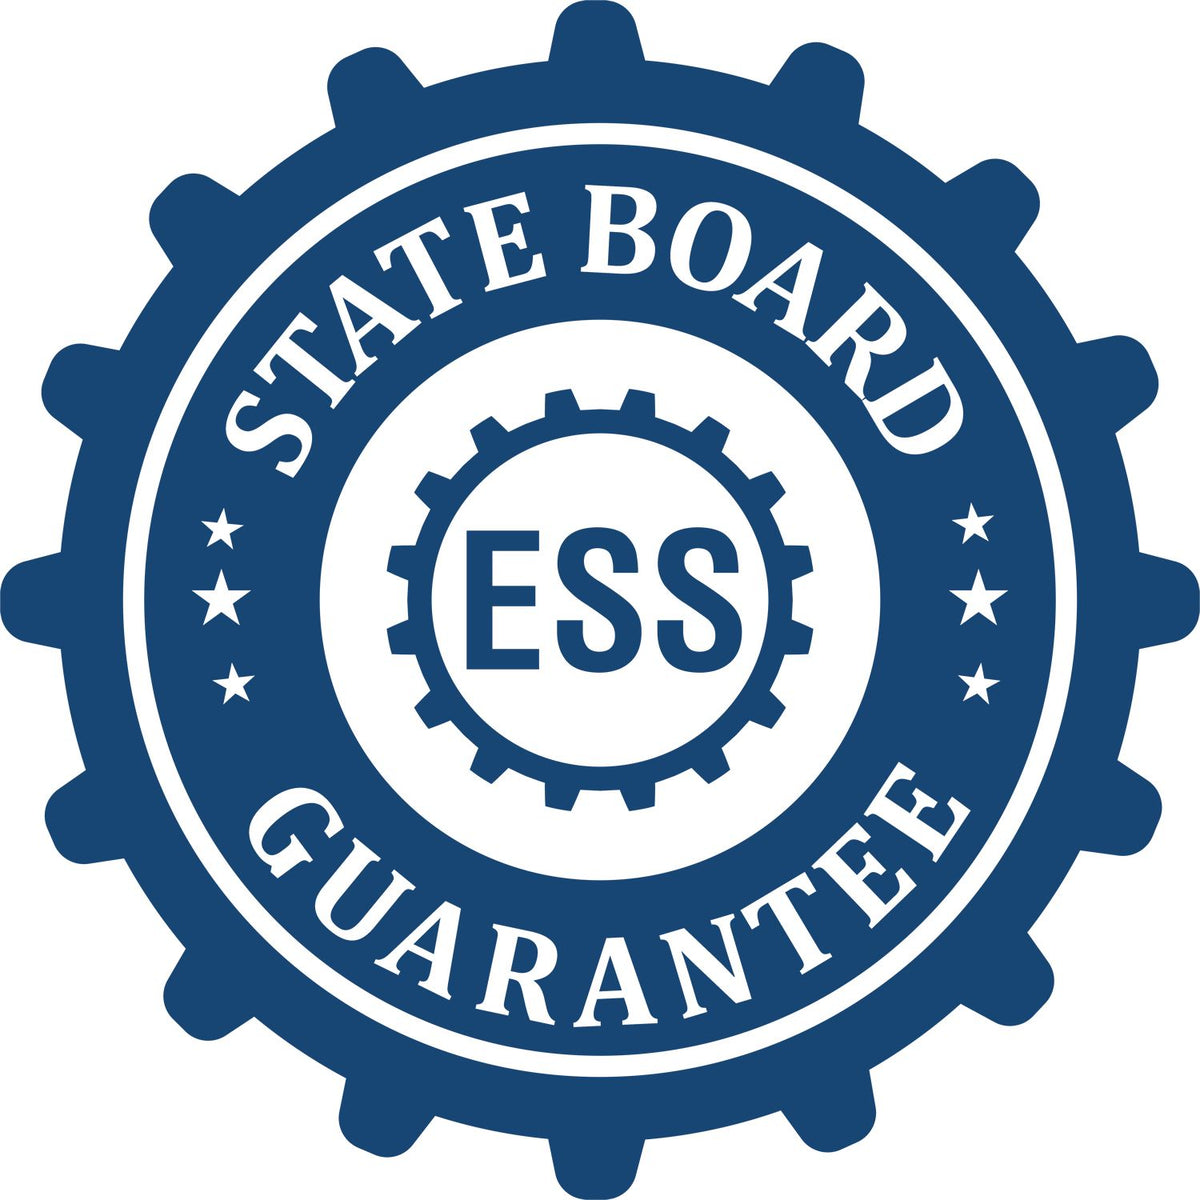 An emblem in a gear shape illustrating a state board guarantee for the Missouri Desk Architect Embossing Seal product.